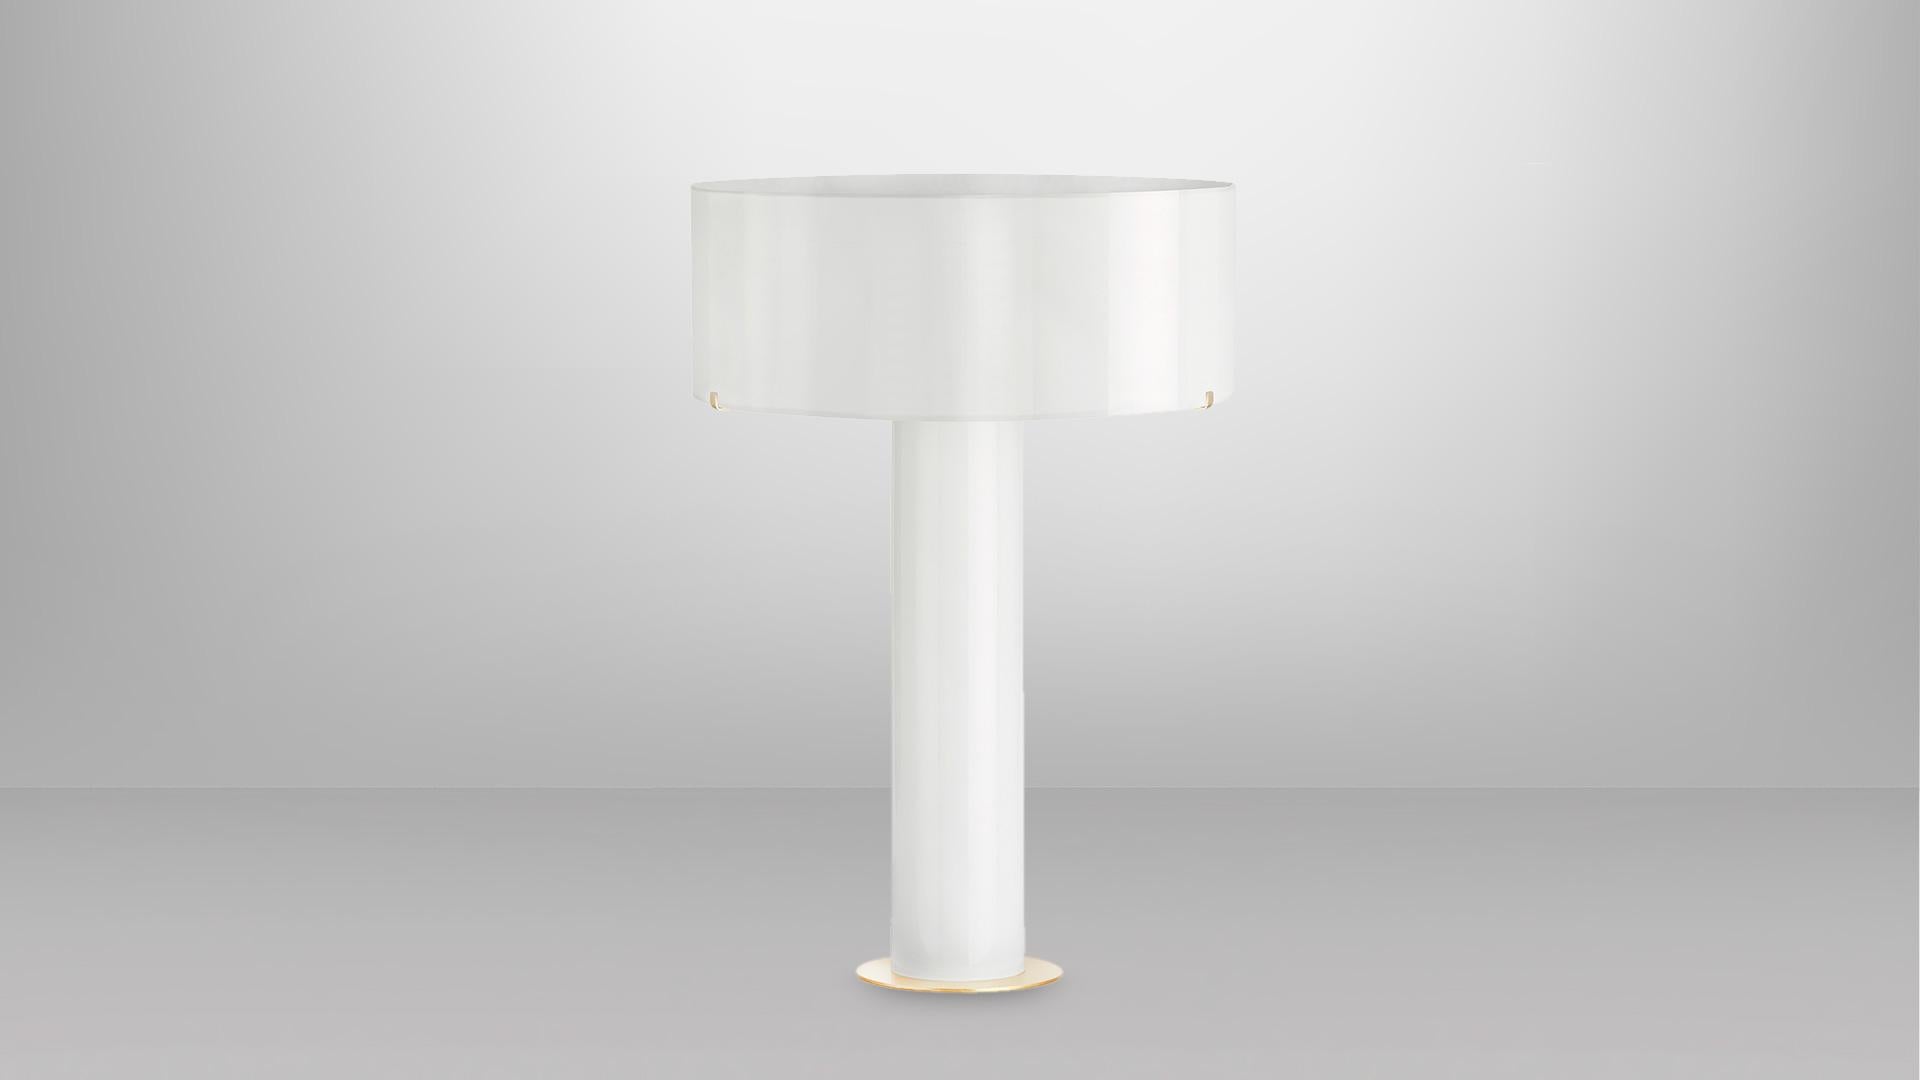 Imperial glass shade table lamp by CTO Lighting
Materials: opal white glass, satin brass
Dimensions: 38.5 x H 56 cm

All our lamps can be wired according to each country. If sold to the USA it will be wired for the USA for instance.

2 x E12,